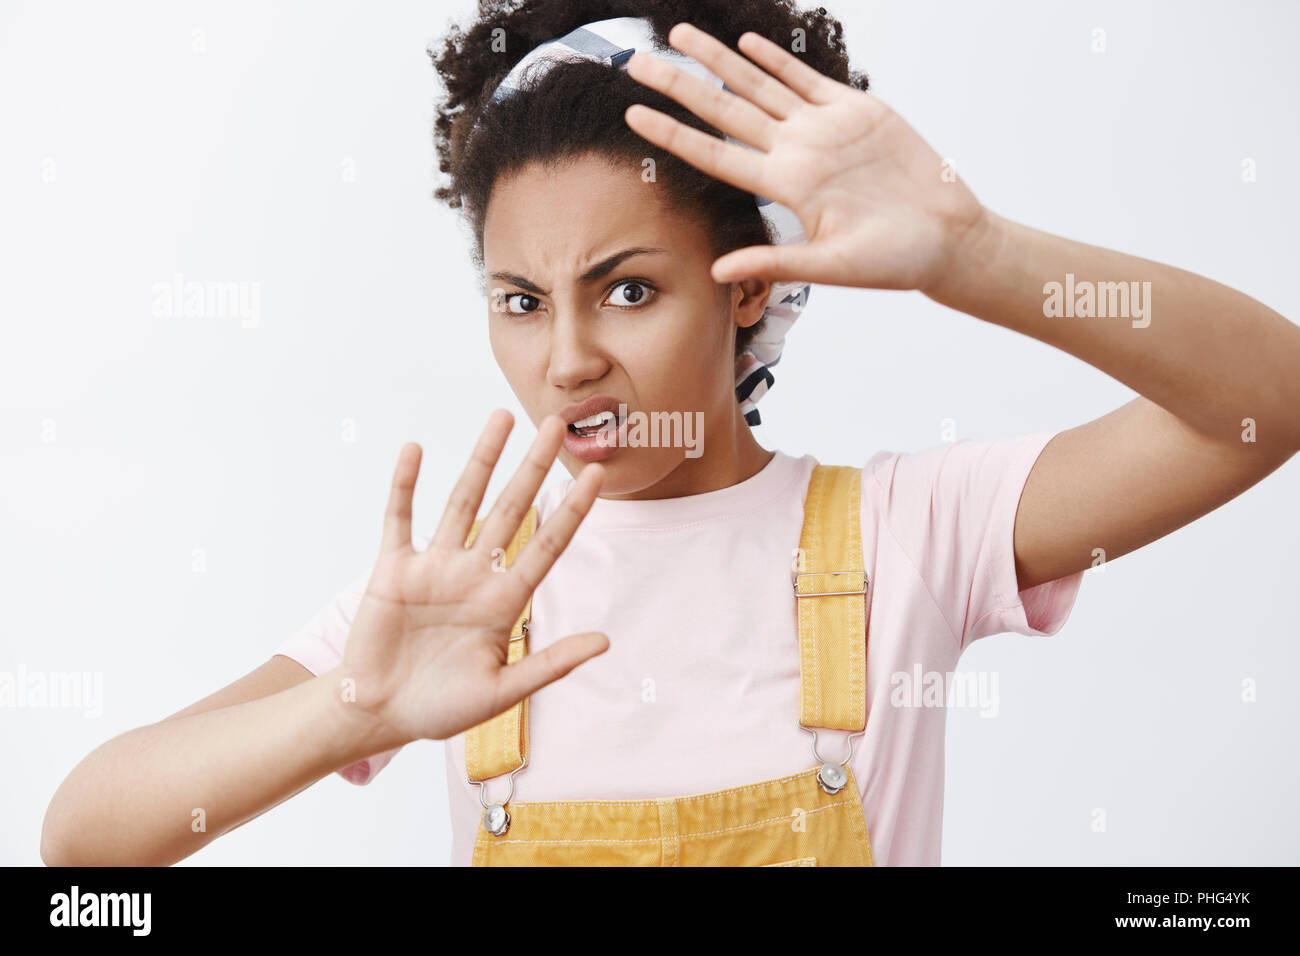 Stop waving it around my face. Portrait of displeased and bothered annoyed African American modern female in yellow overalls and headband, covering from flash of camera with raised palms, frowning Stock Photo